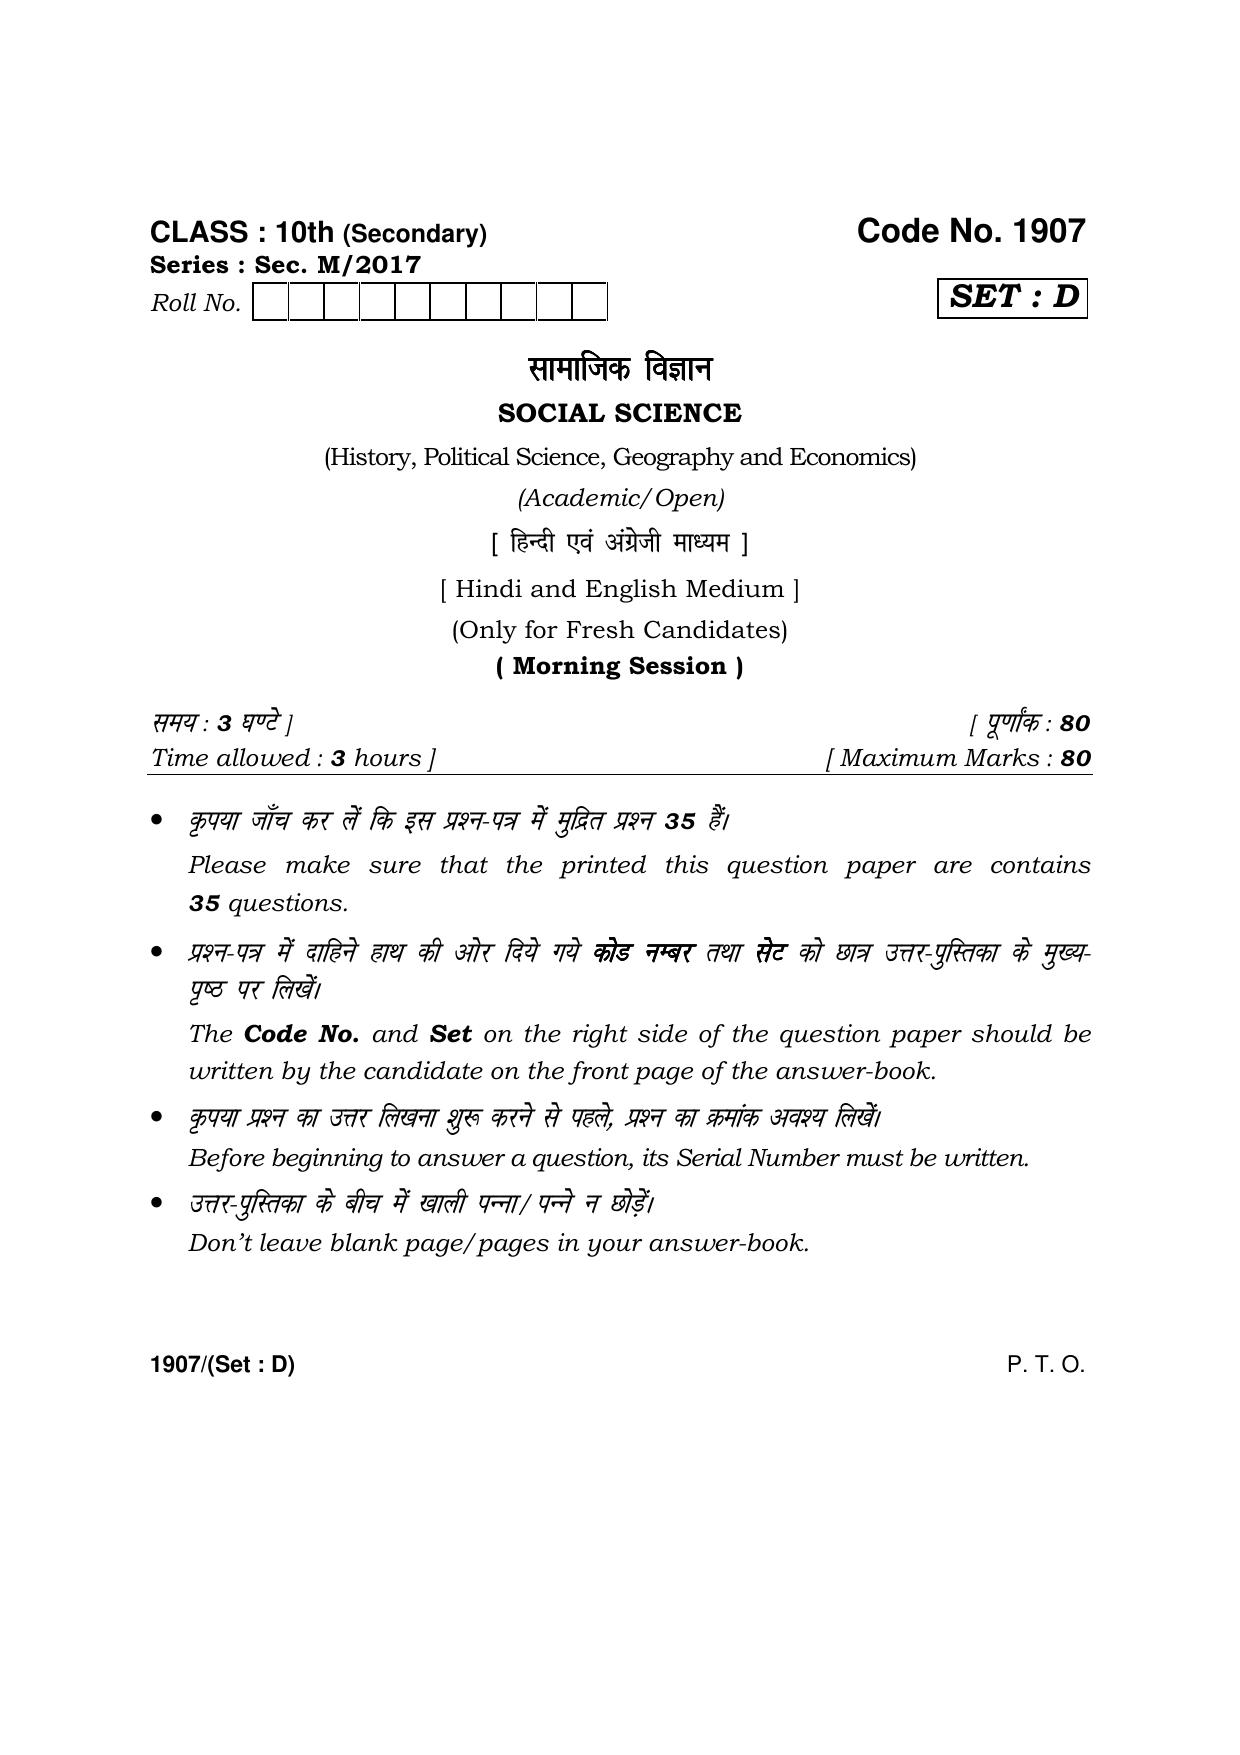 Haryana Board HBSE Class 10 Social Science -D 2017 Question Paper - Page 1